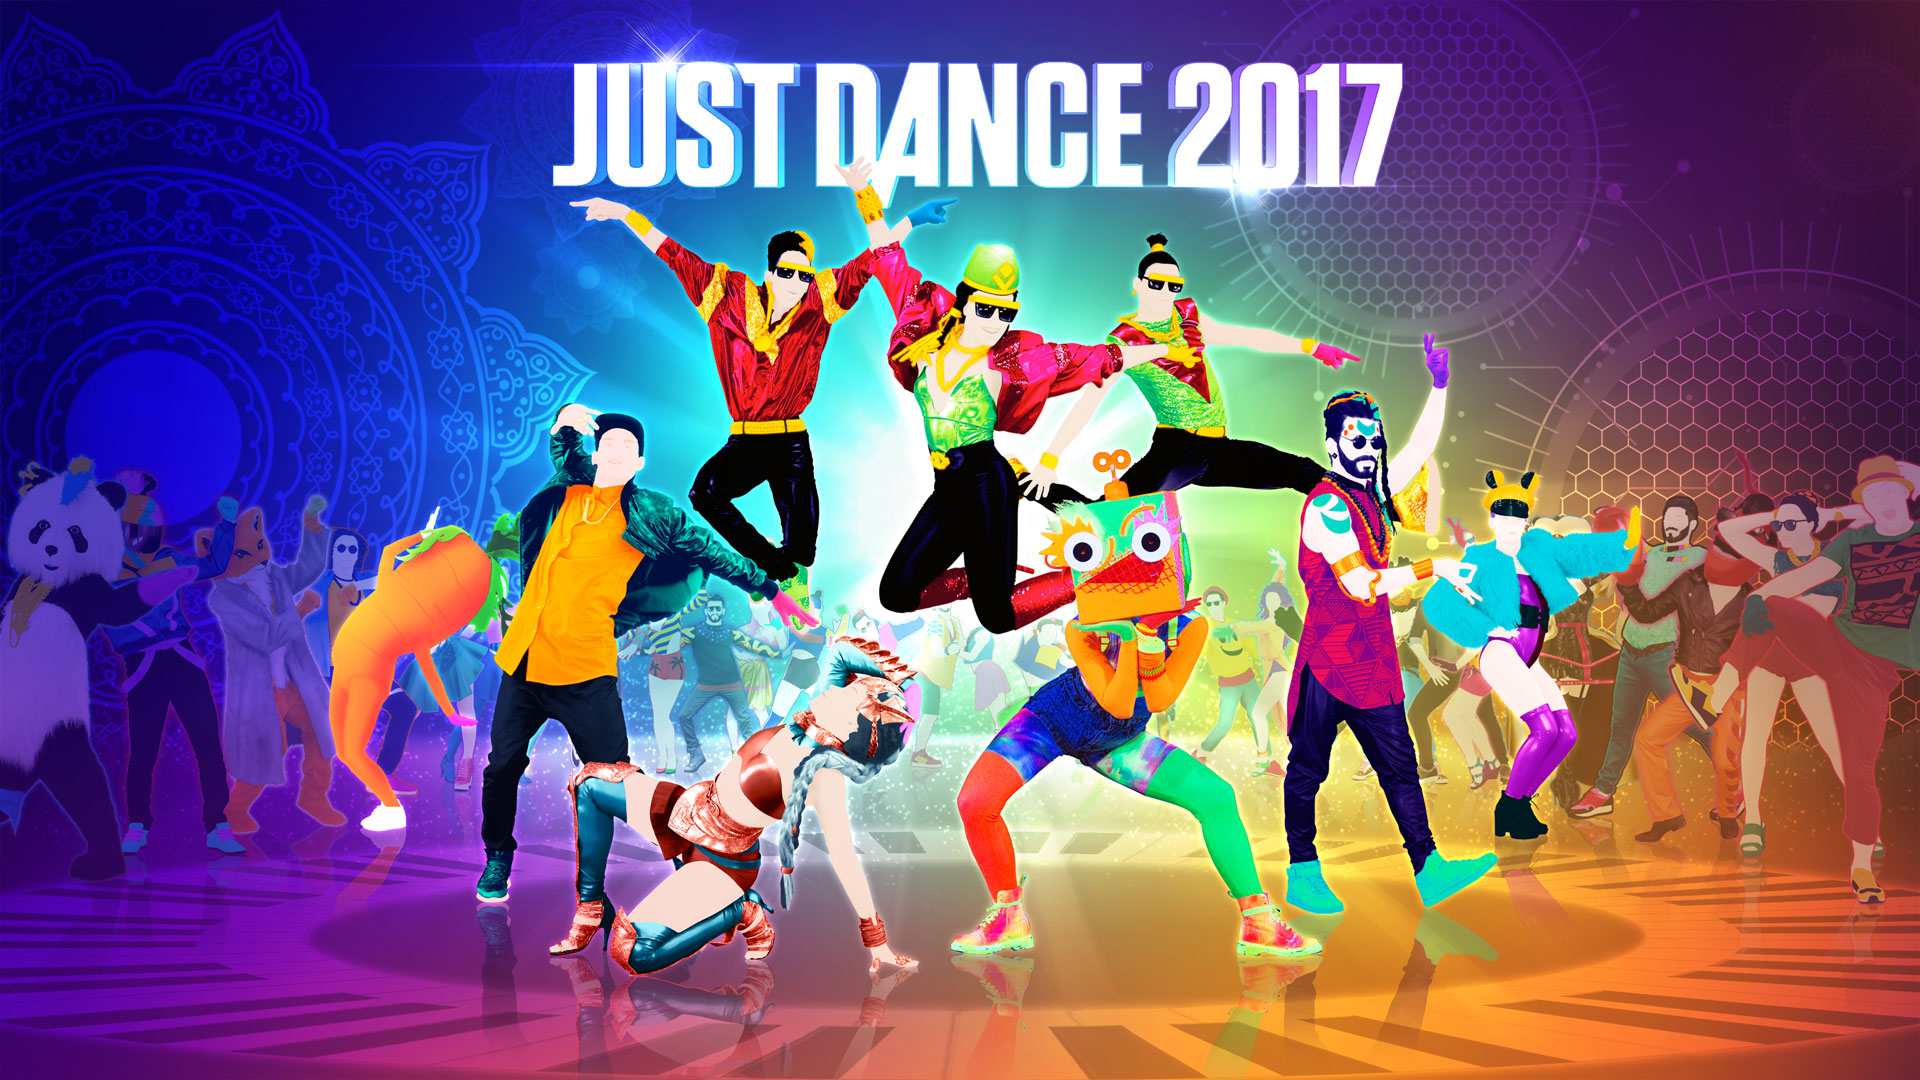 Just Dance 2017, Ubisoft annuncia le canzoni